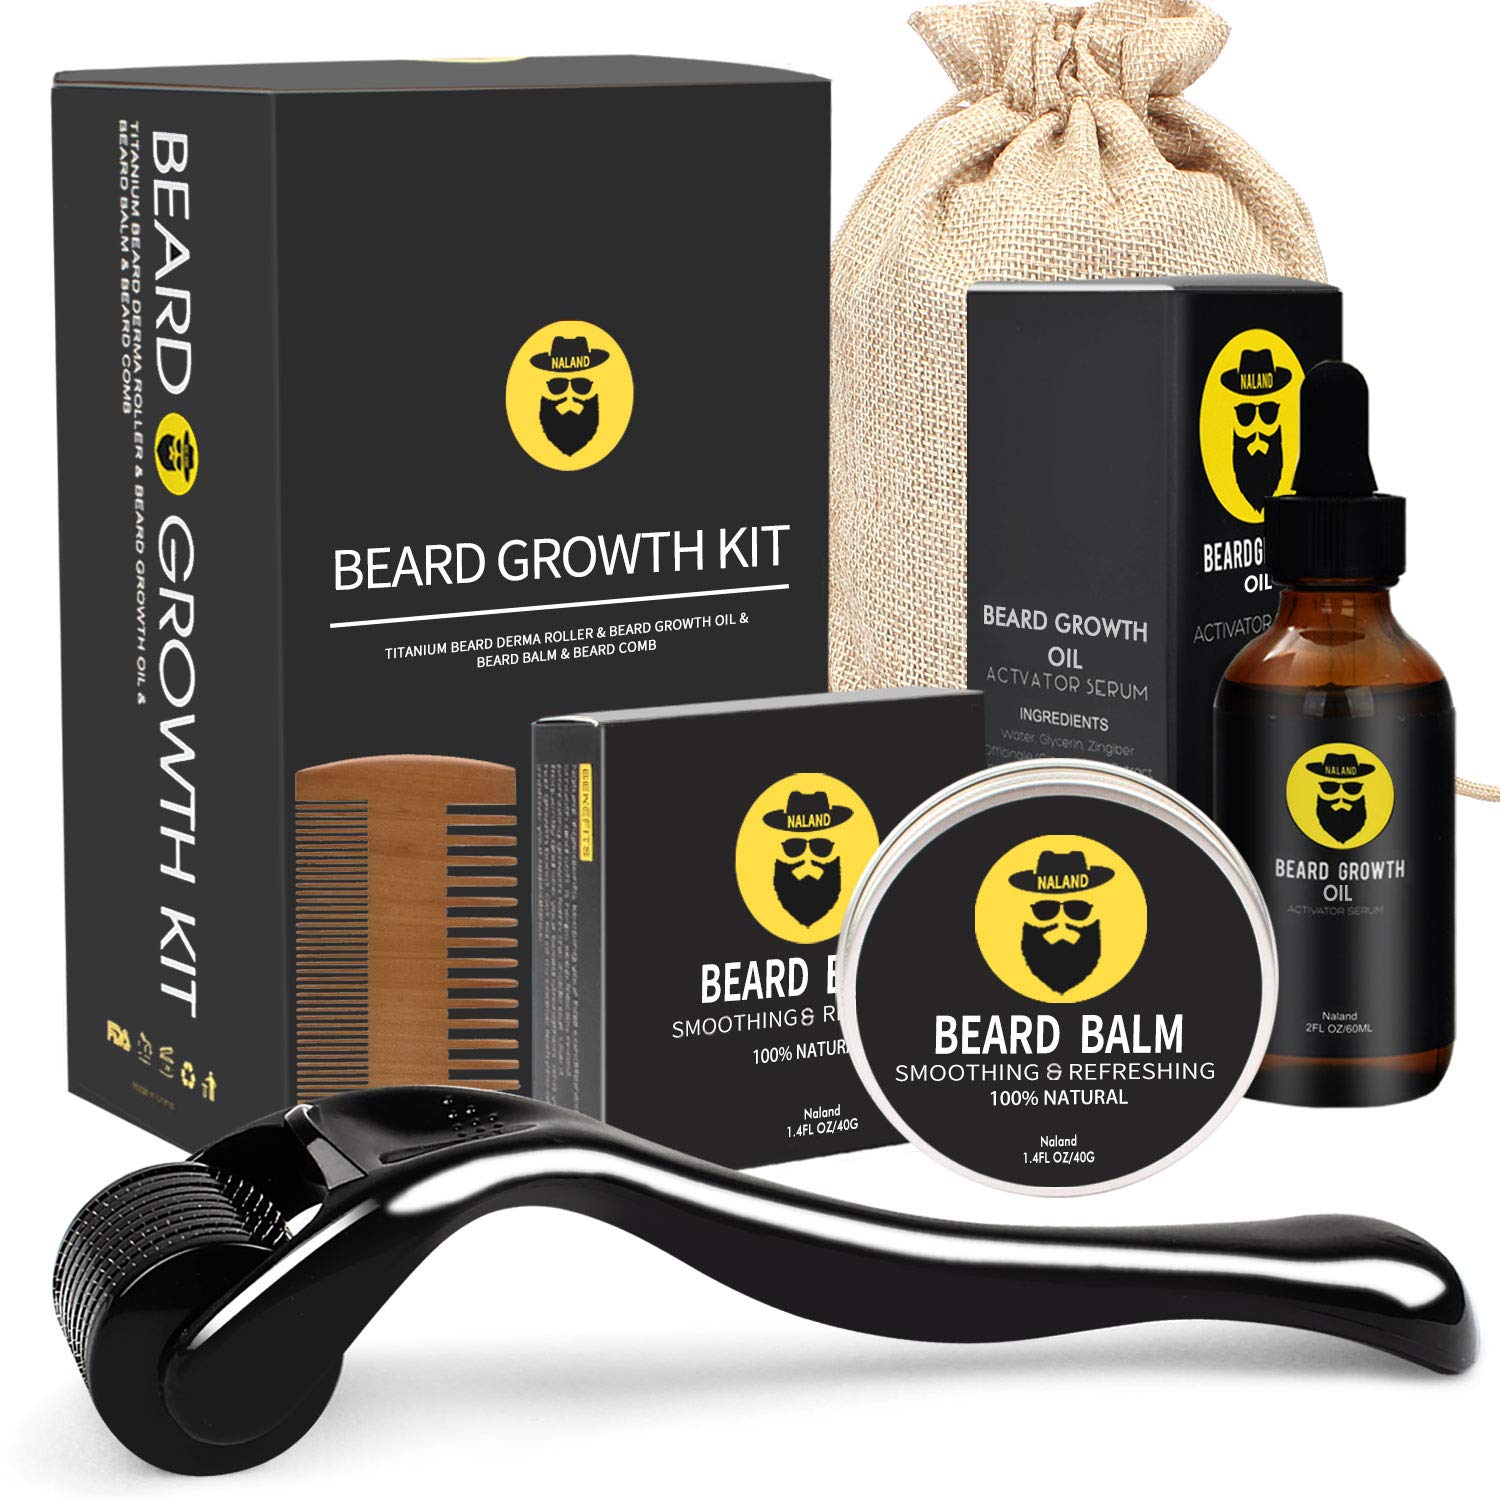 Beard Growth Kit - Derma Roller for Beard Growth, Beard Growth Serum Oil, Beard Balm and Comb, Stimulate Beard and Hair Growth - Gifts for Men Dad Him Boyfriend Husband Brother - image 1 of 3